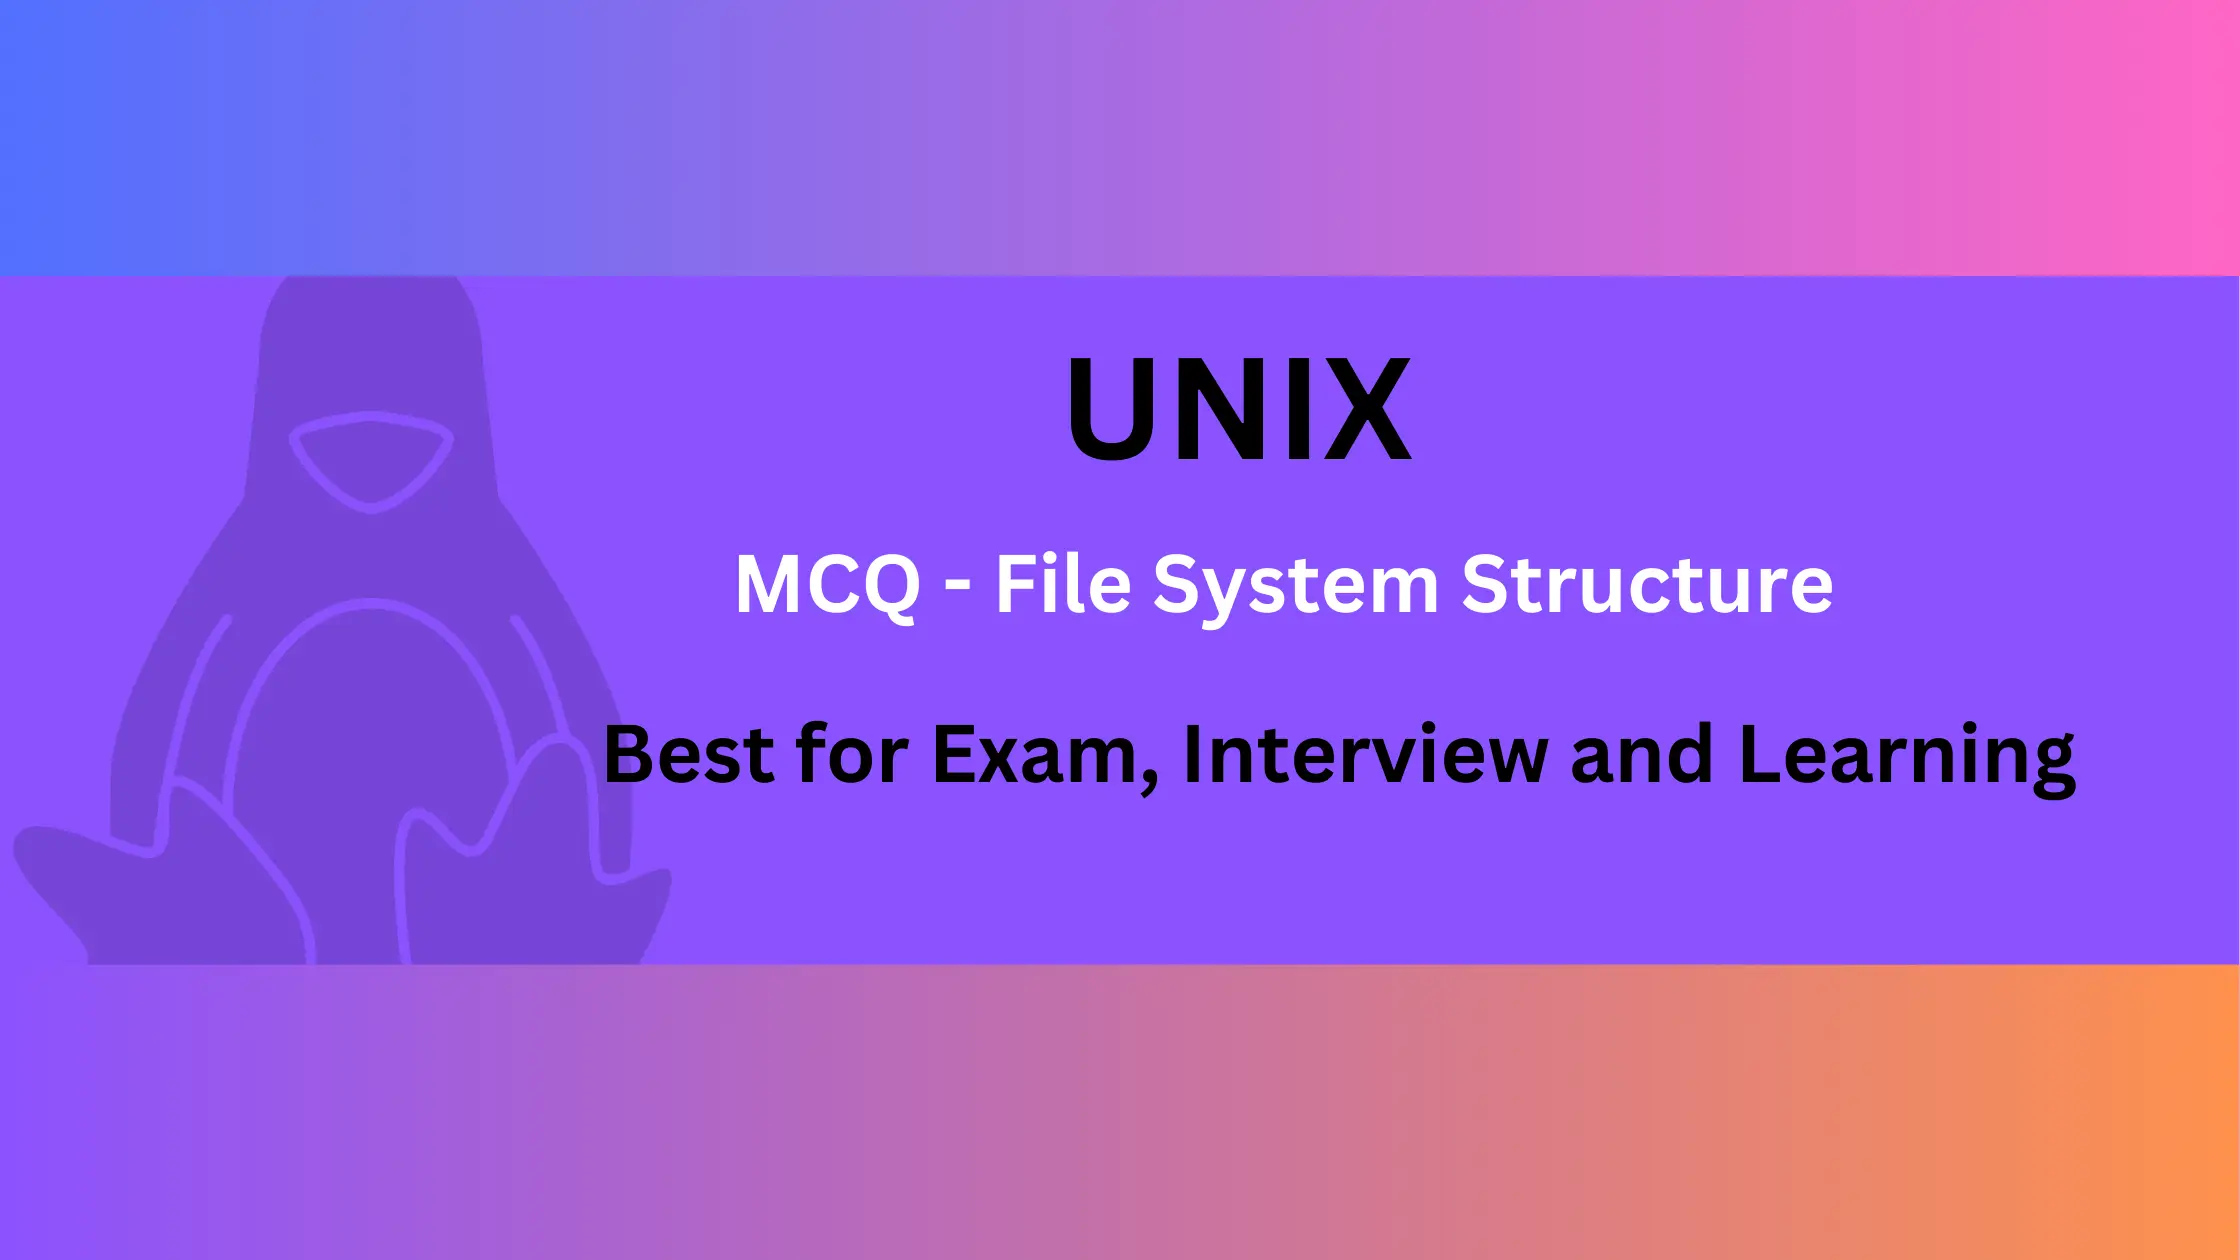 UNIX MCQs Questions and answers on File System Structure